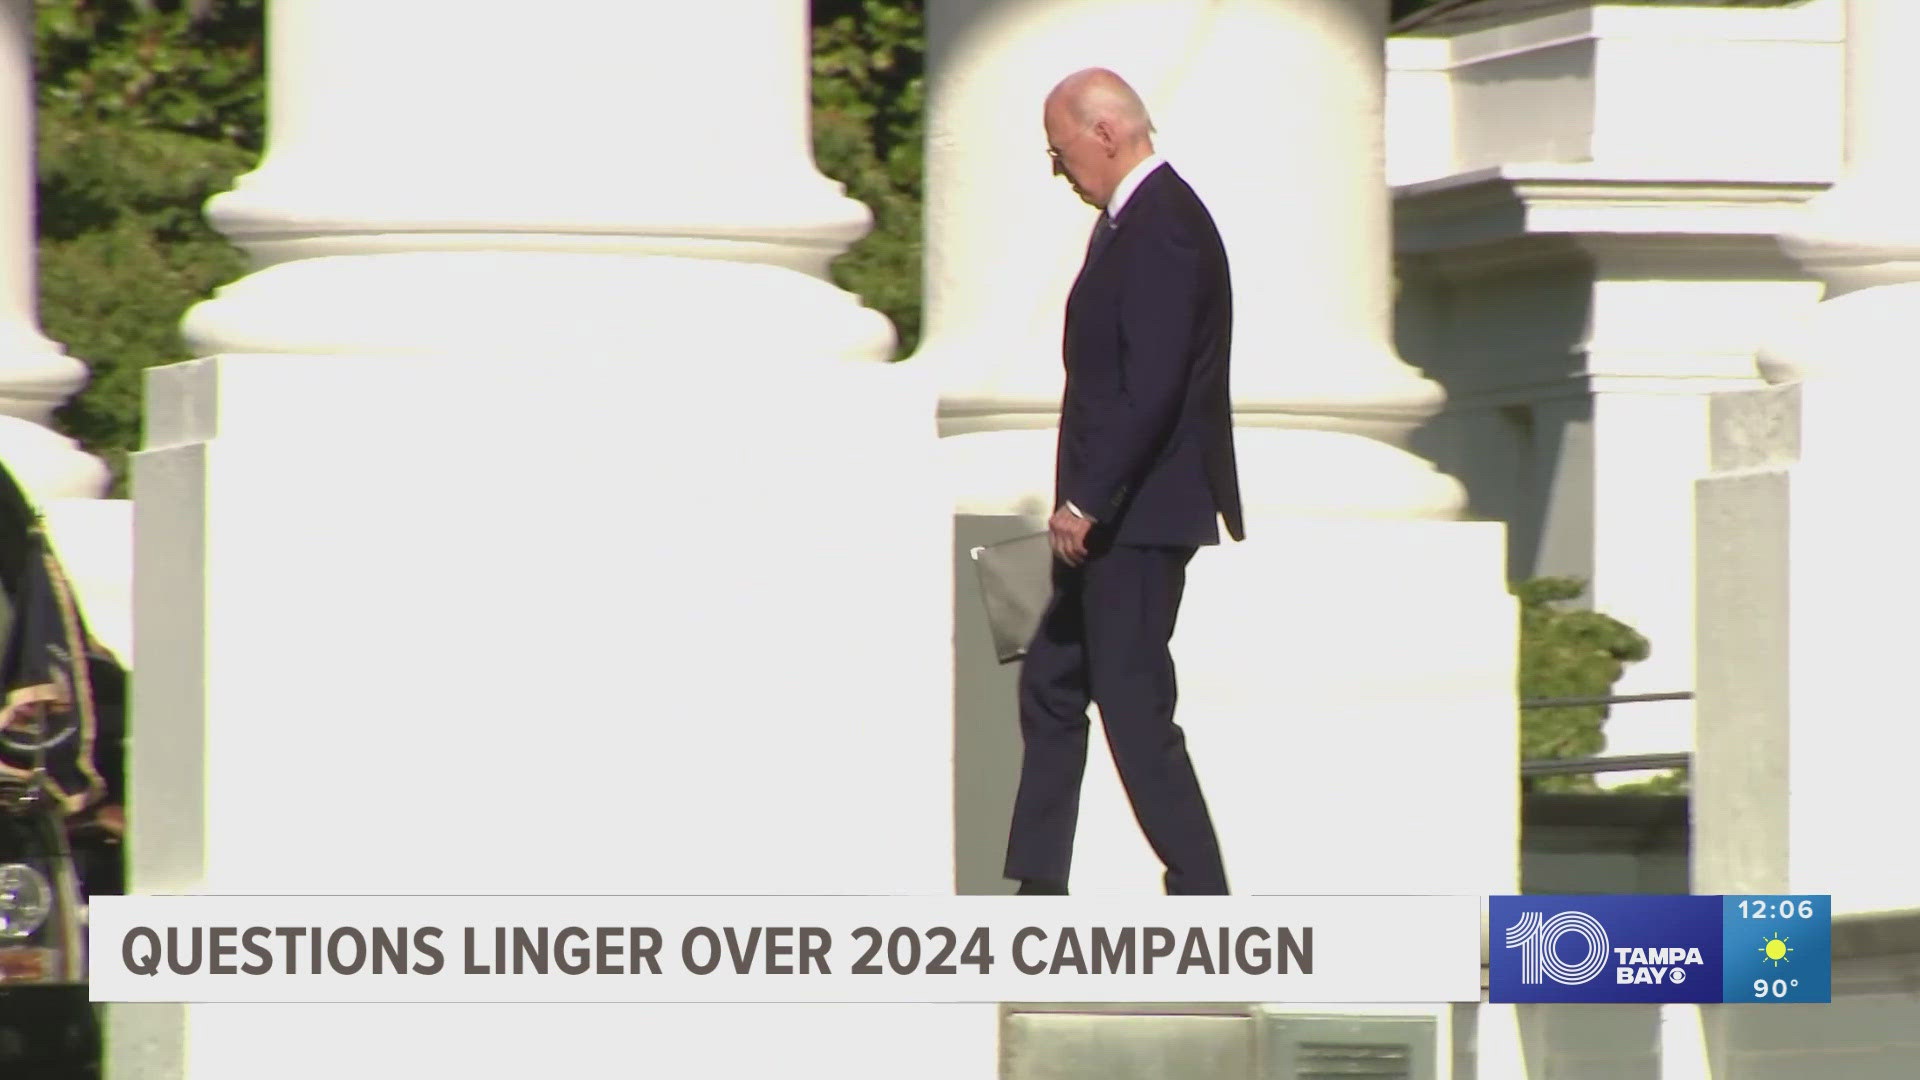 This comes as Biden faces questions about his 2024 campaign following last week's debate.